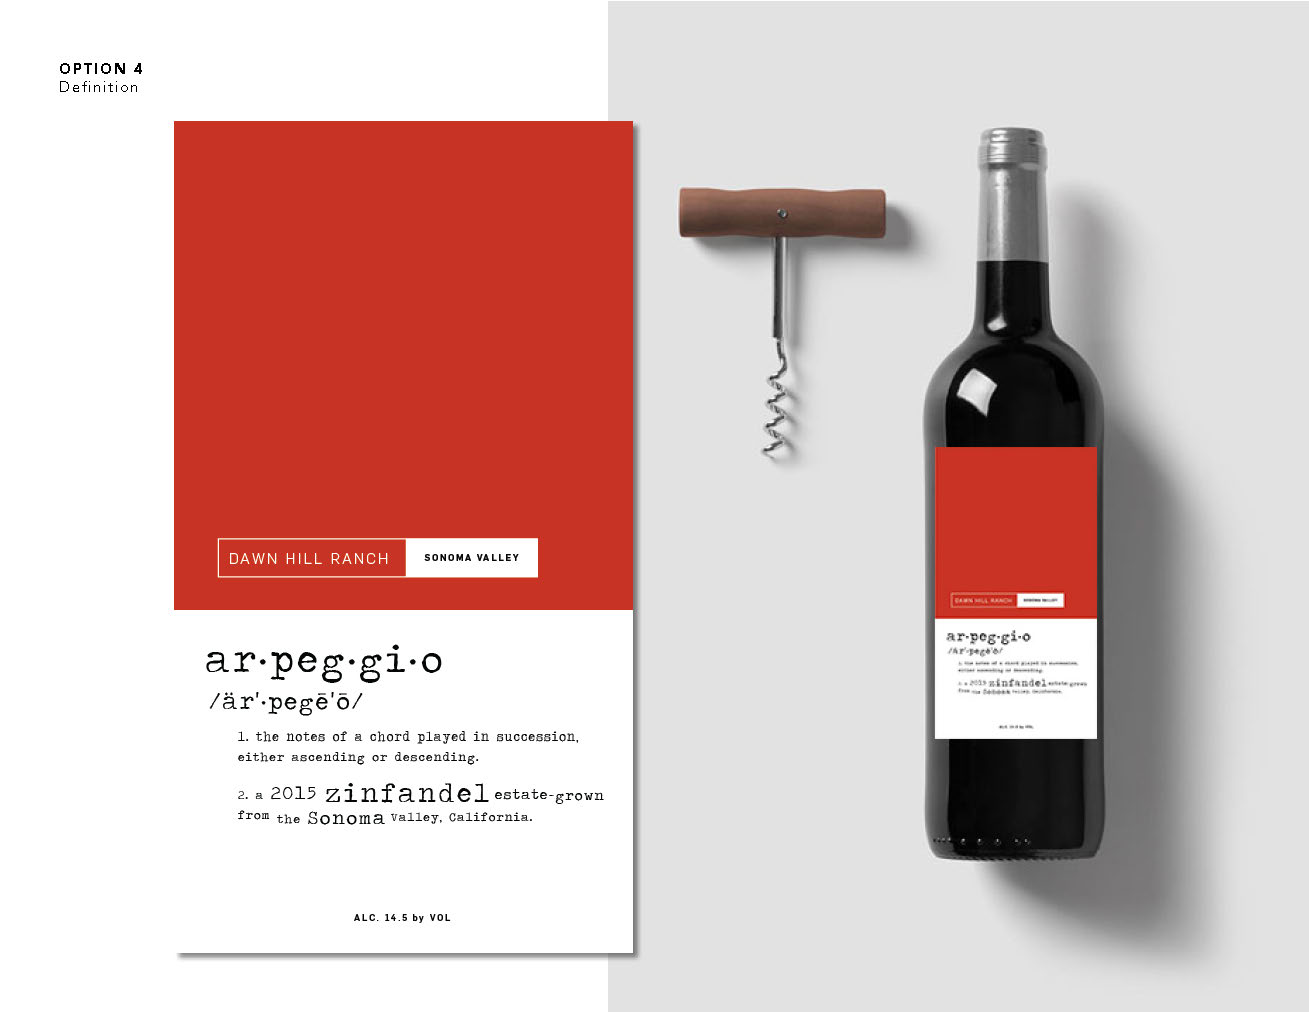  Having fun with color, copy &amp; type. A (literally) defining option for their first bottle.  